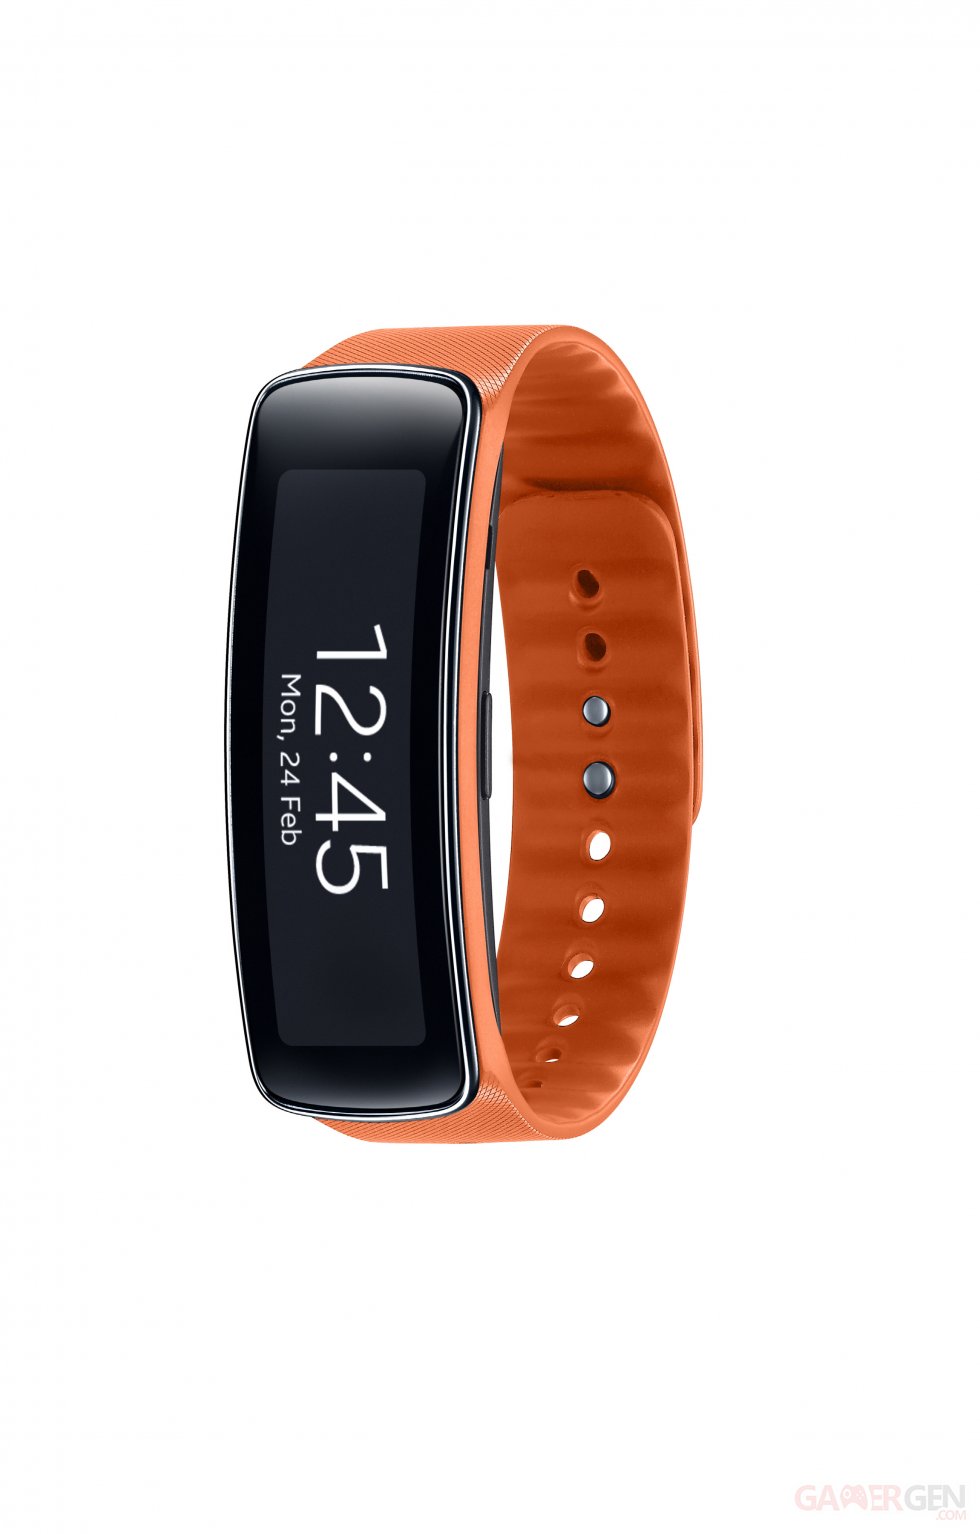 Samsung-Gear-Fit_25-02-2014_pic (22)